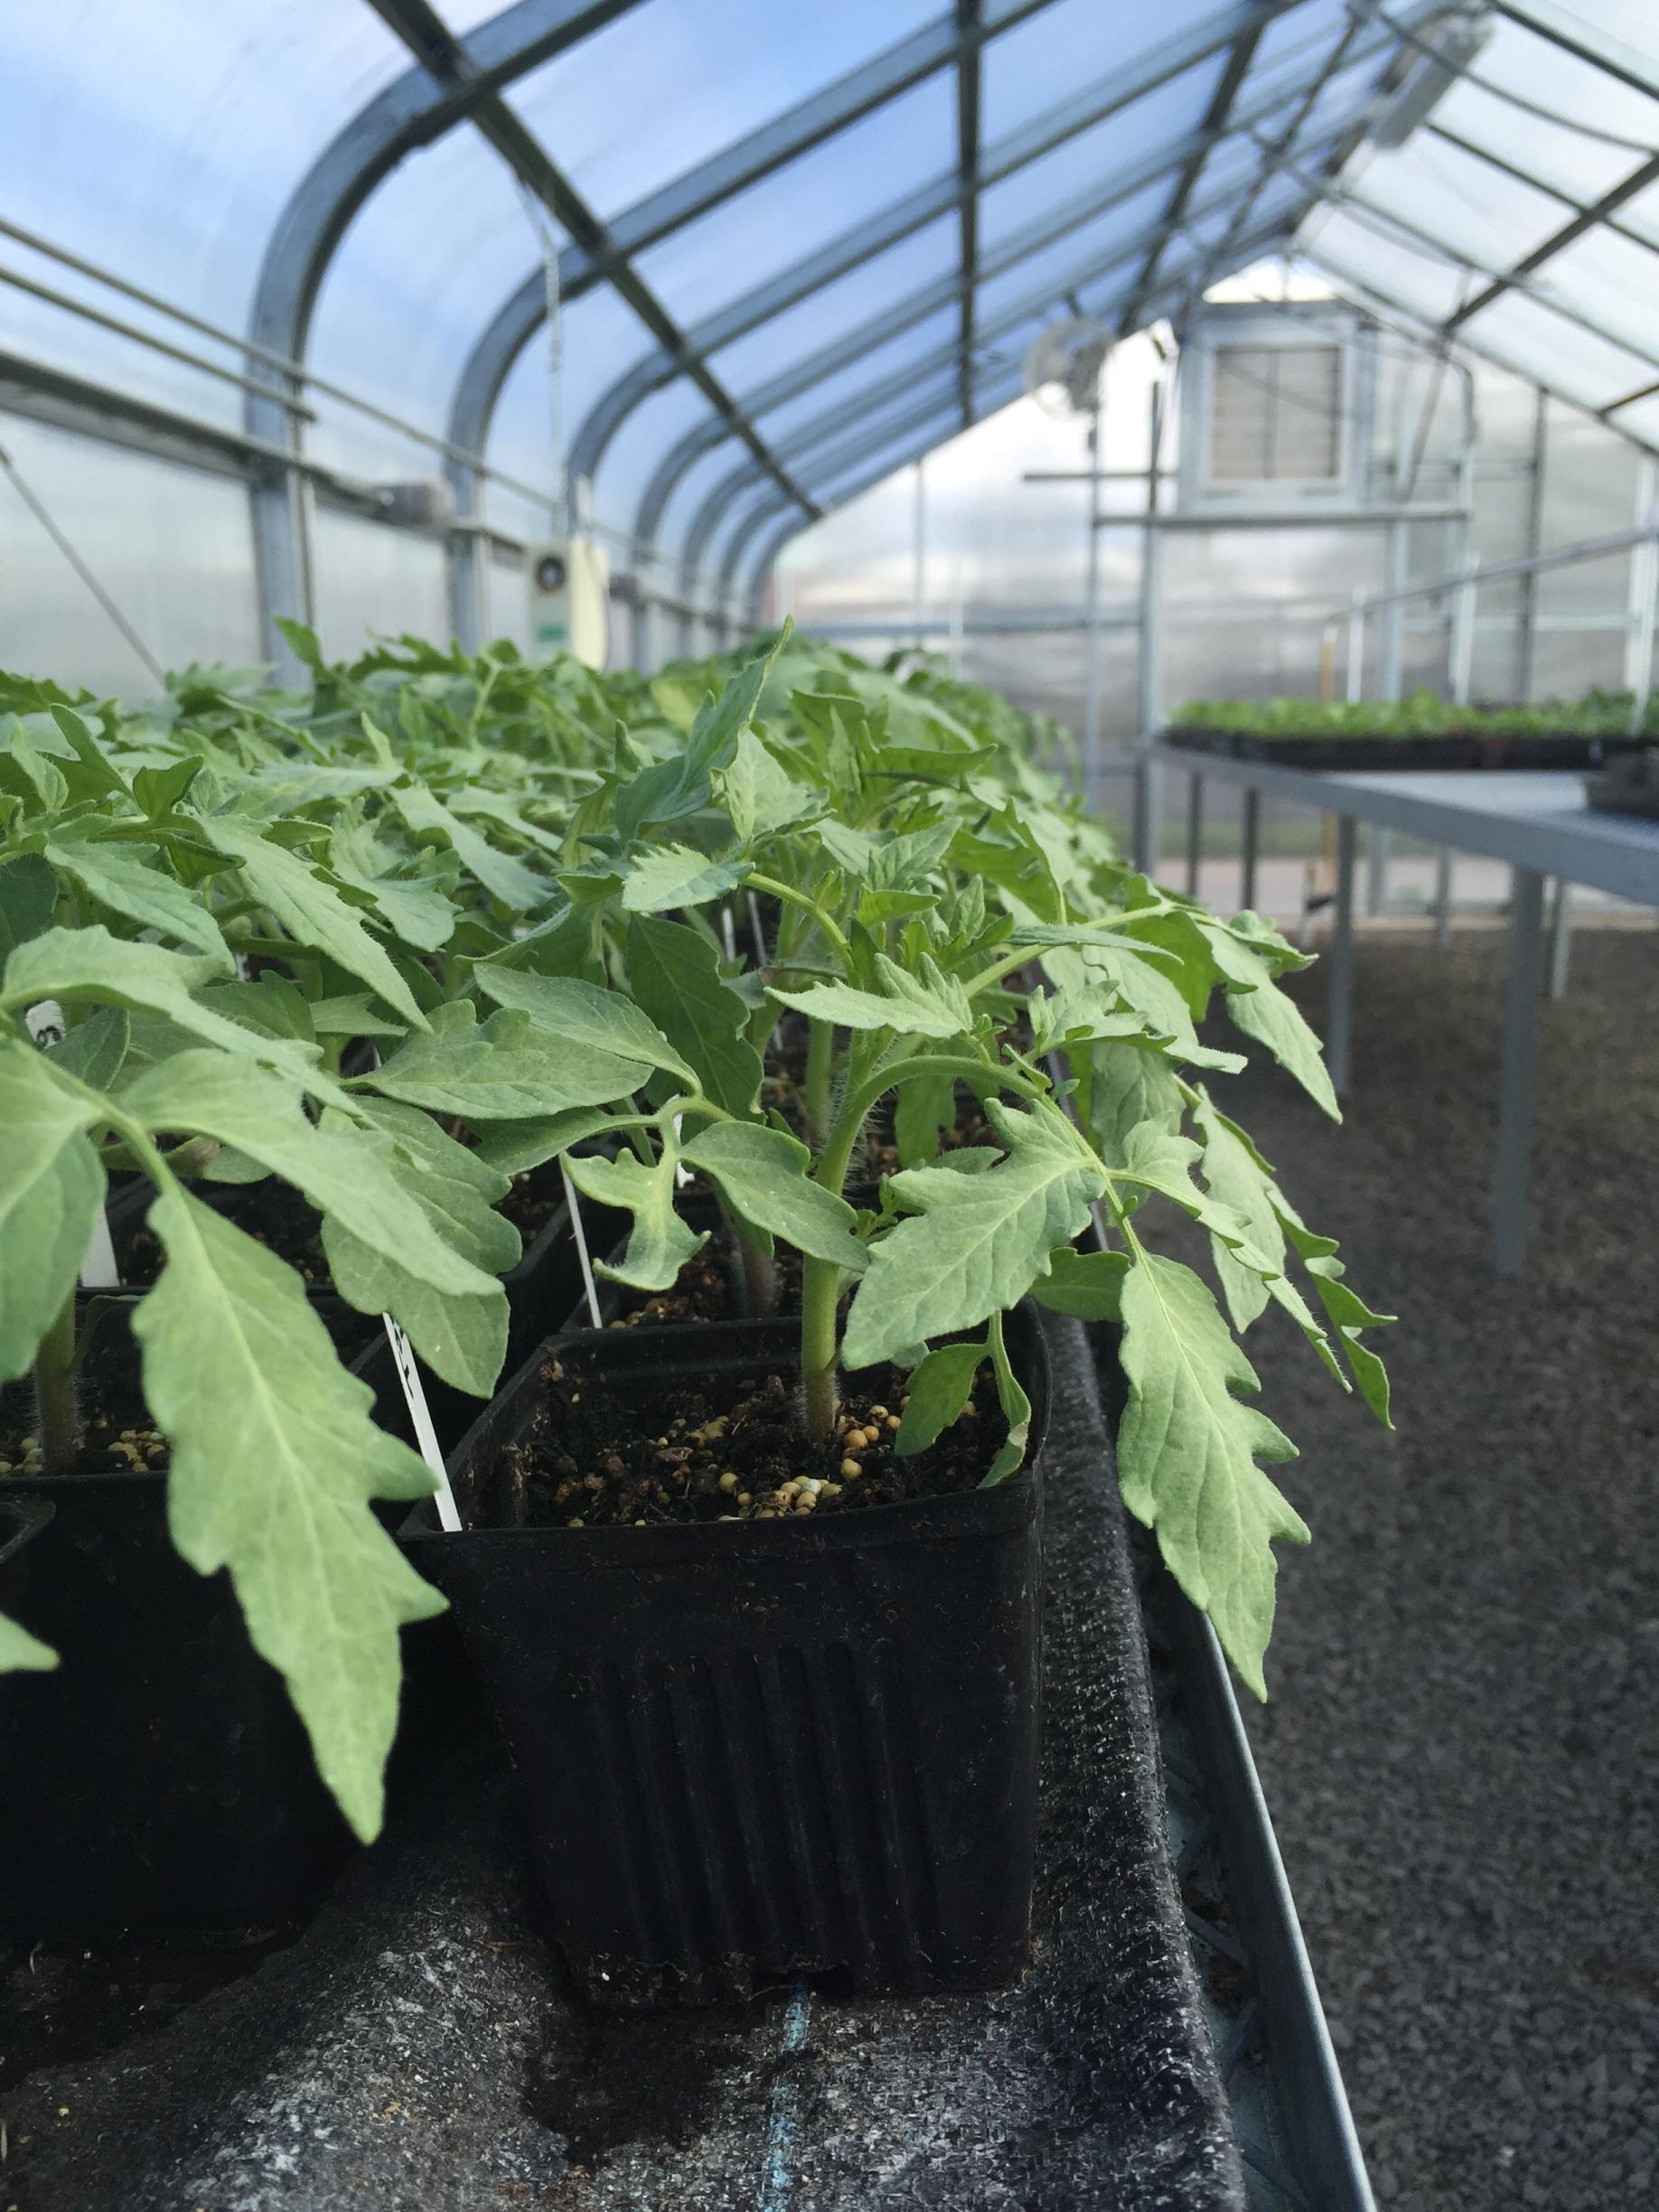 Tomato plants growing in a green house.